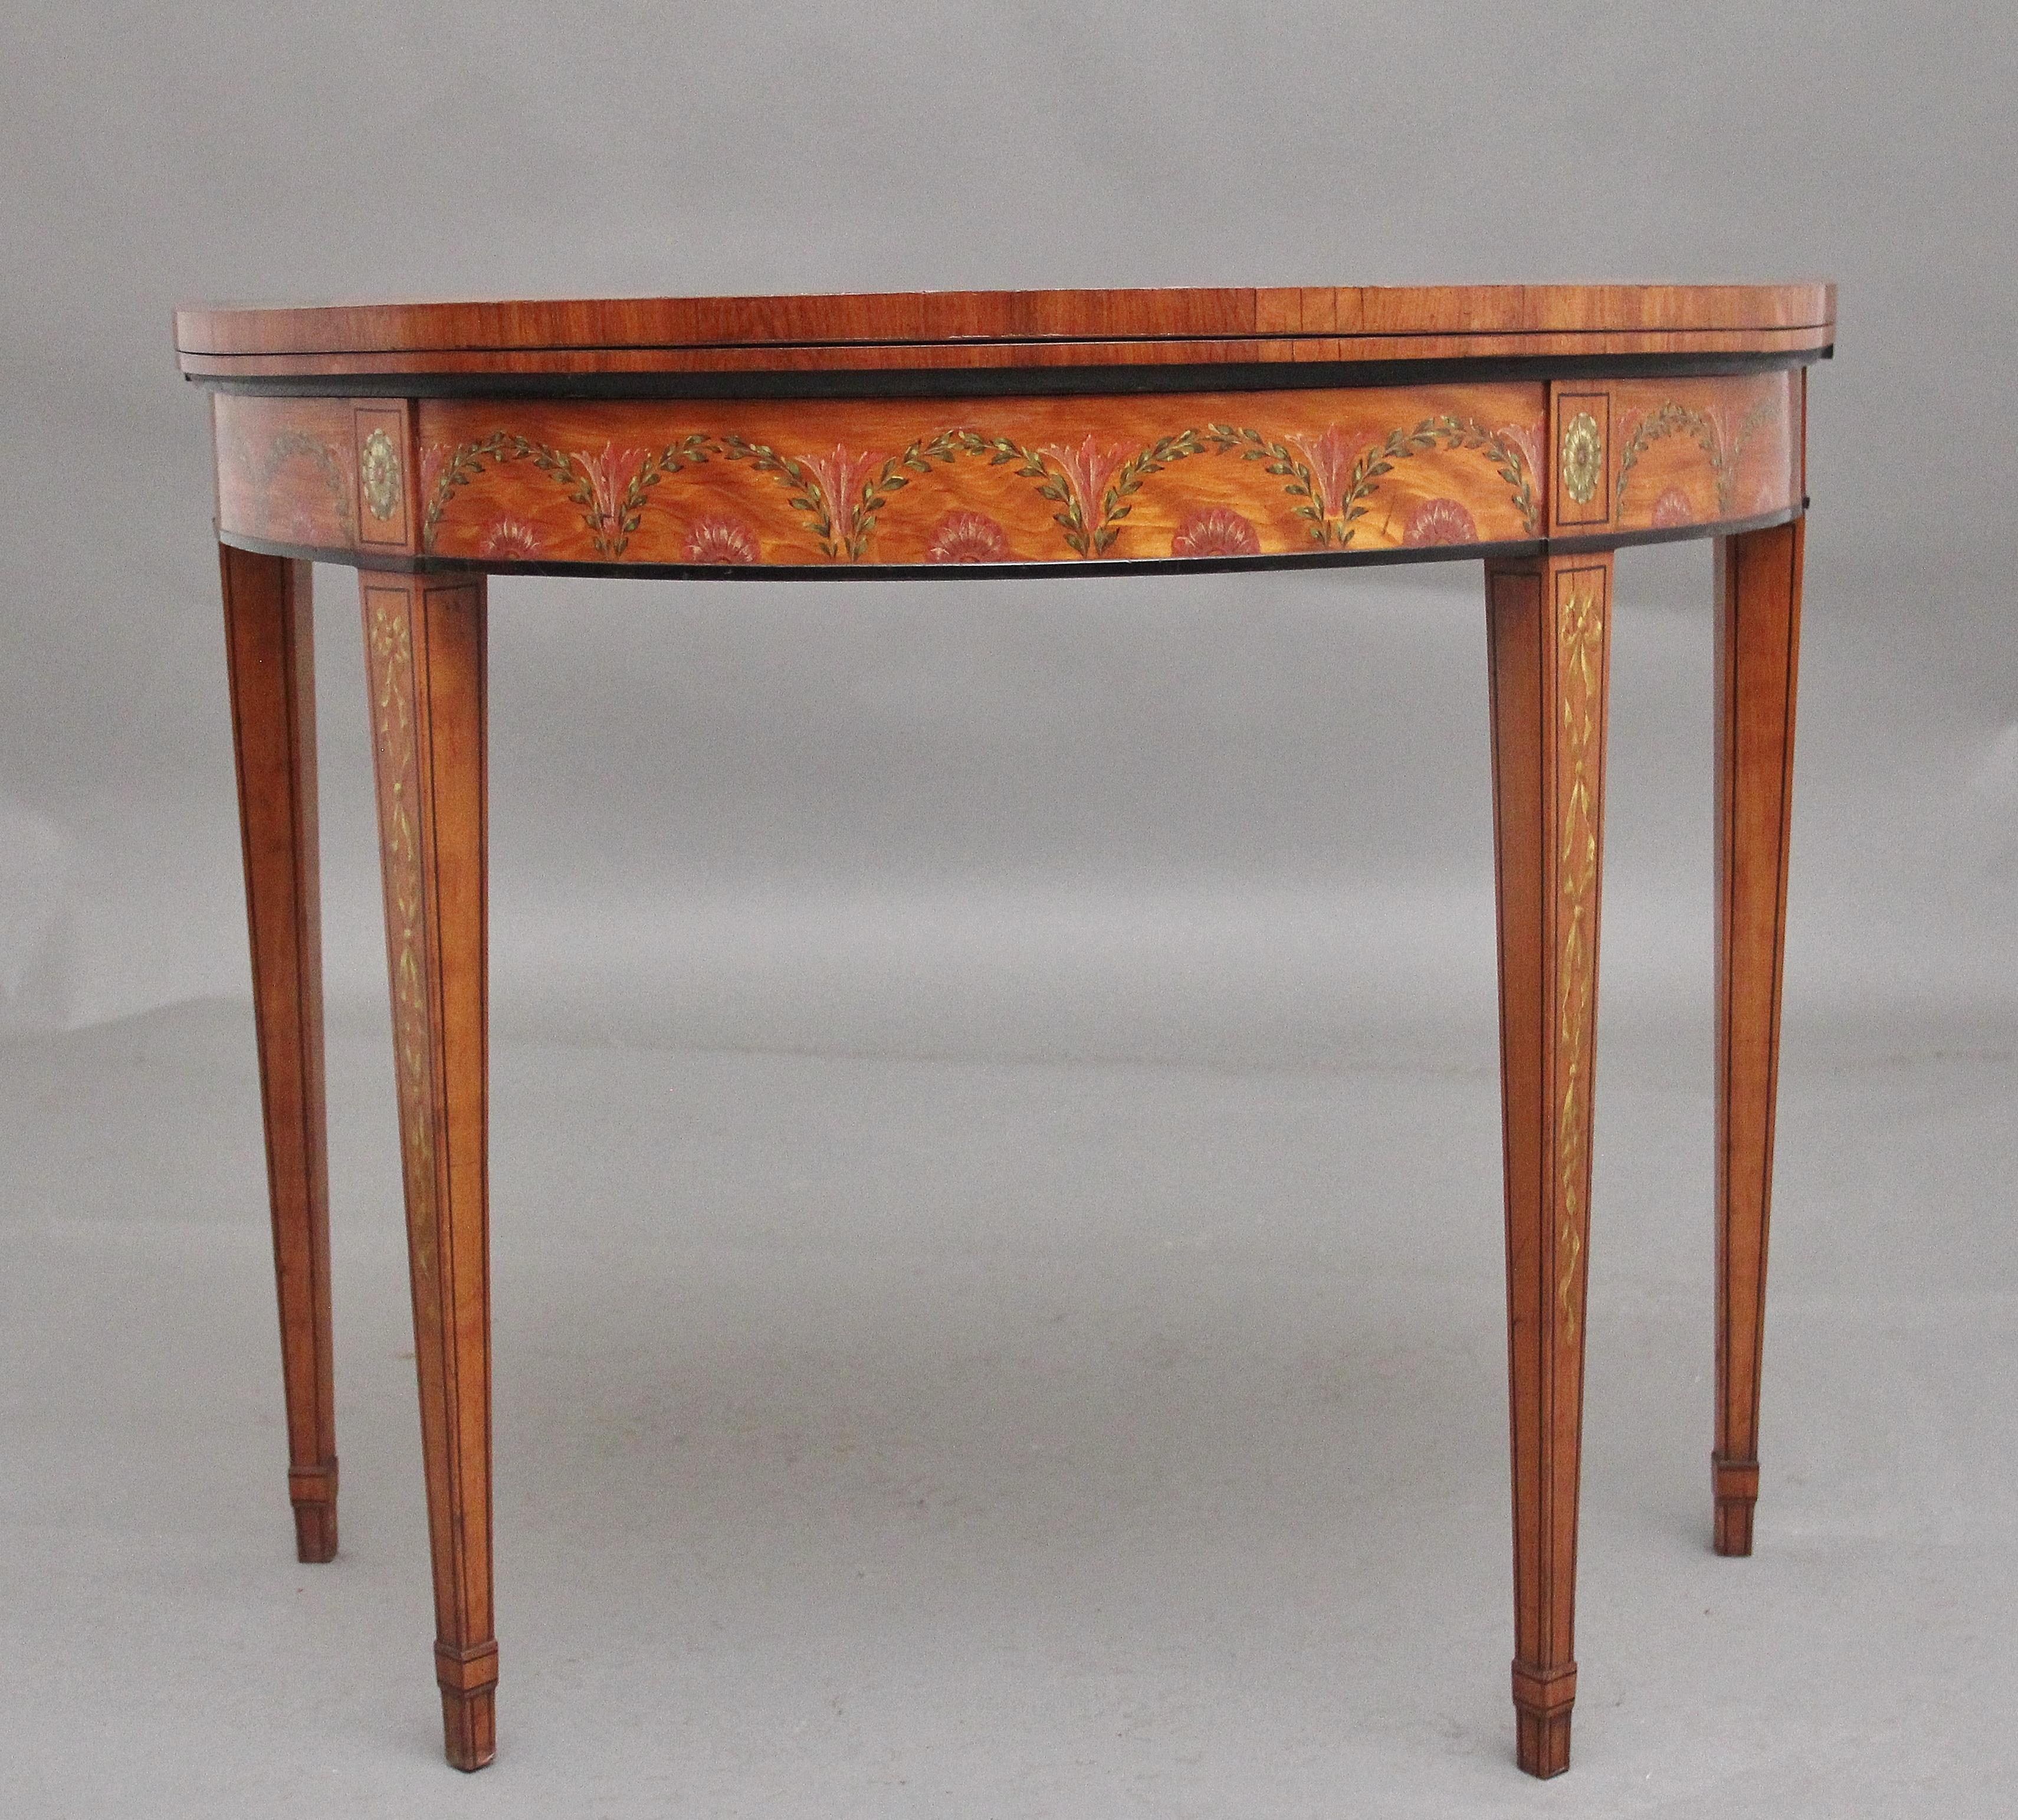 A highly decorative and fabulous quality early 19th Century painted satinwood card/games table in the Sheraton style, having a nice figured top with painted floral decoration, the top opening to reveal a baize playing surface, the frieze below with